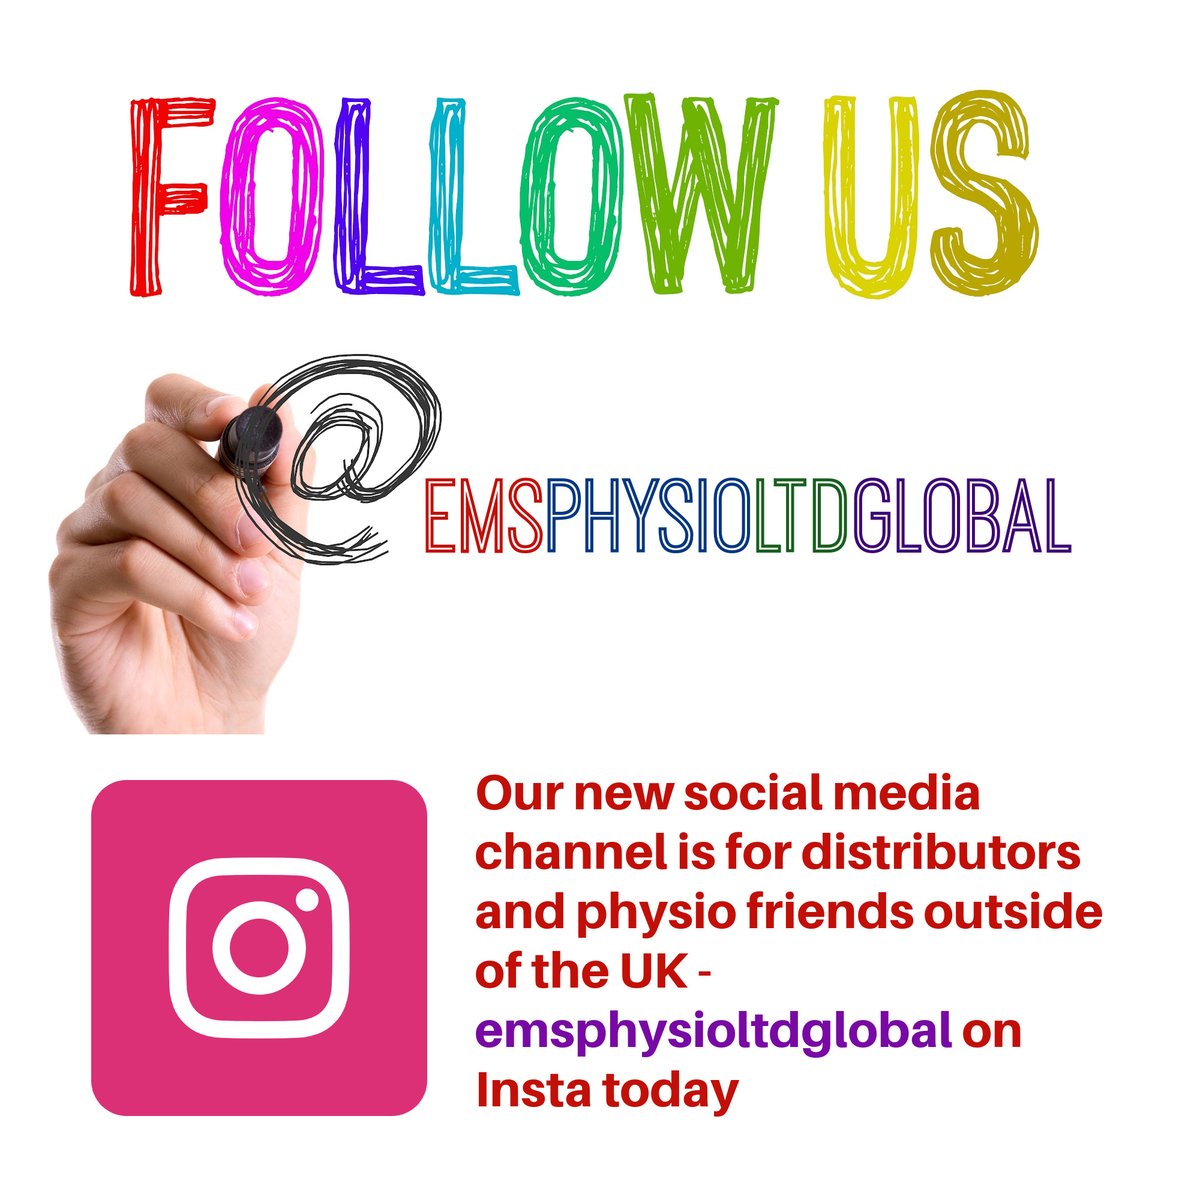 Our NEW GLOBAL social media channel to connect with our valued distributors and physio friends outside of the UK. FInd us and follow today!

Find us on INSTAGRAM today at instagram.com/emsphysioltdgl…

#emsphysioltdglobal #globalconnections #emsphysioltd #instagram